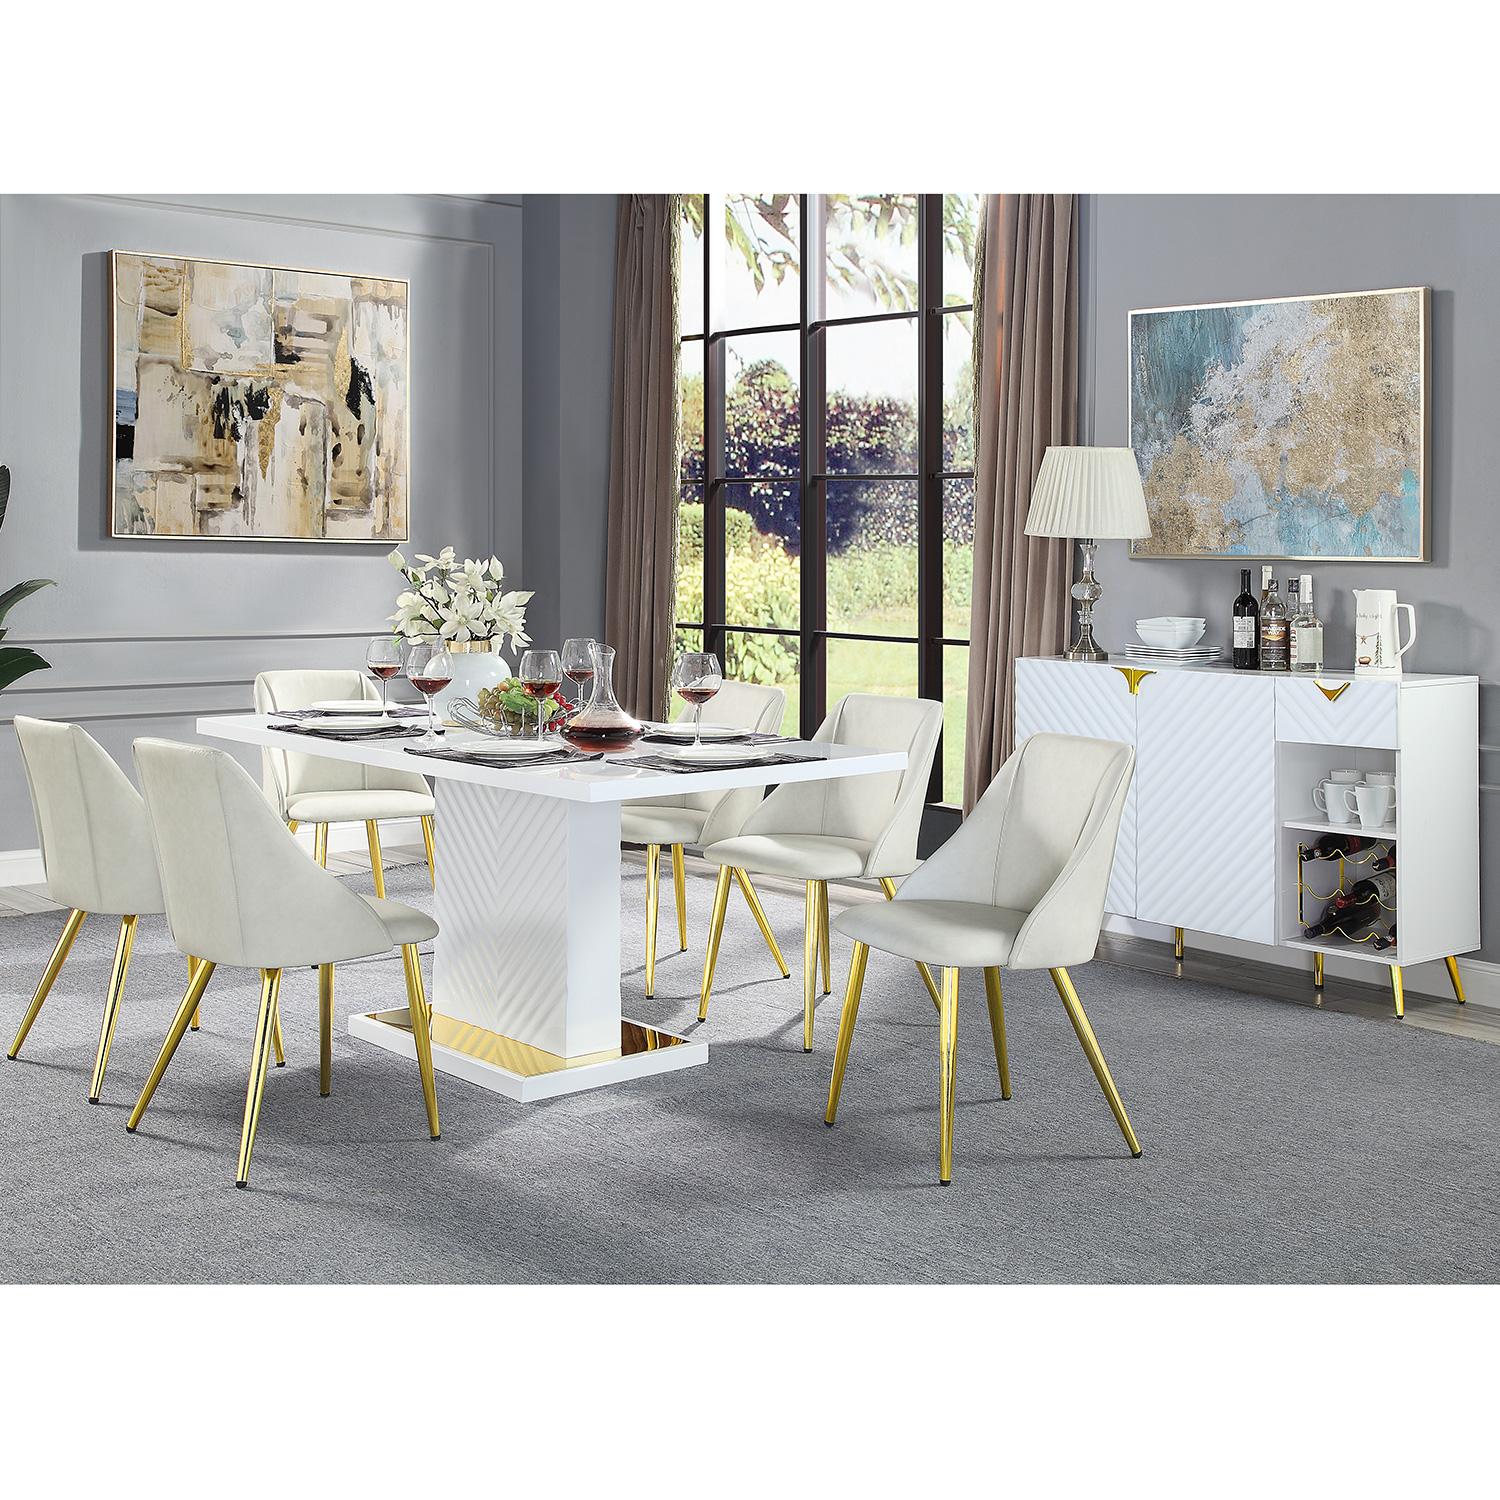 Modern, Casual Dining Room Set Gaines DN01258-7pcs in White 